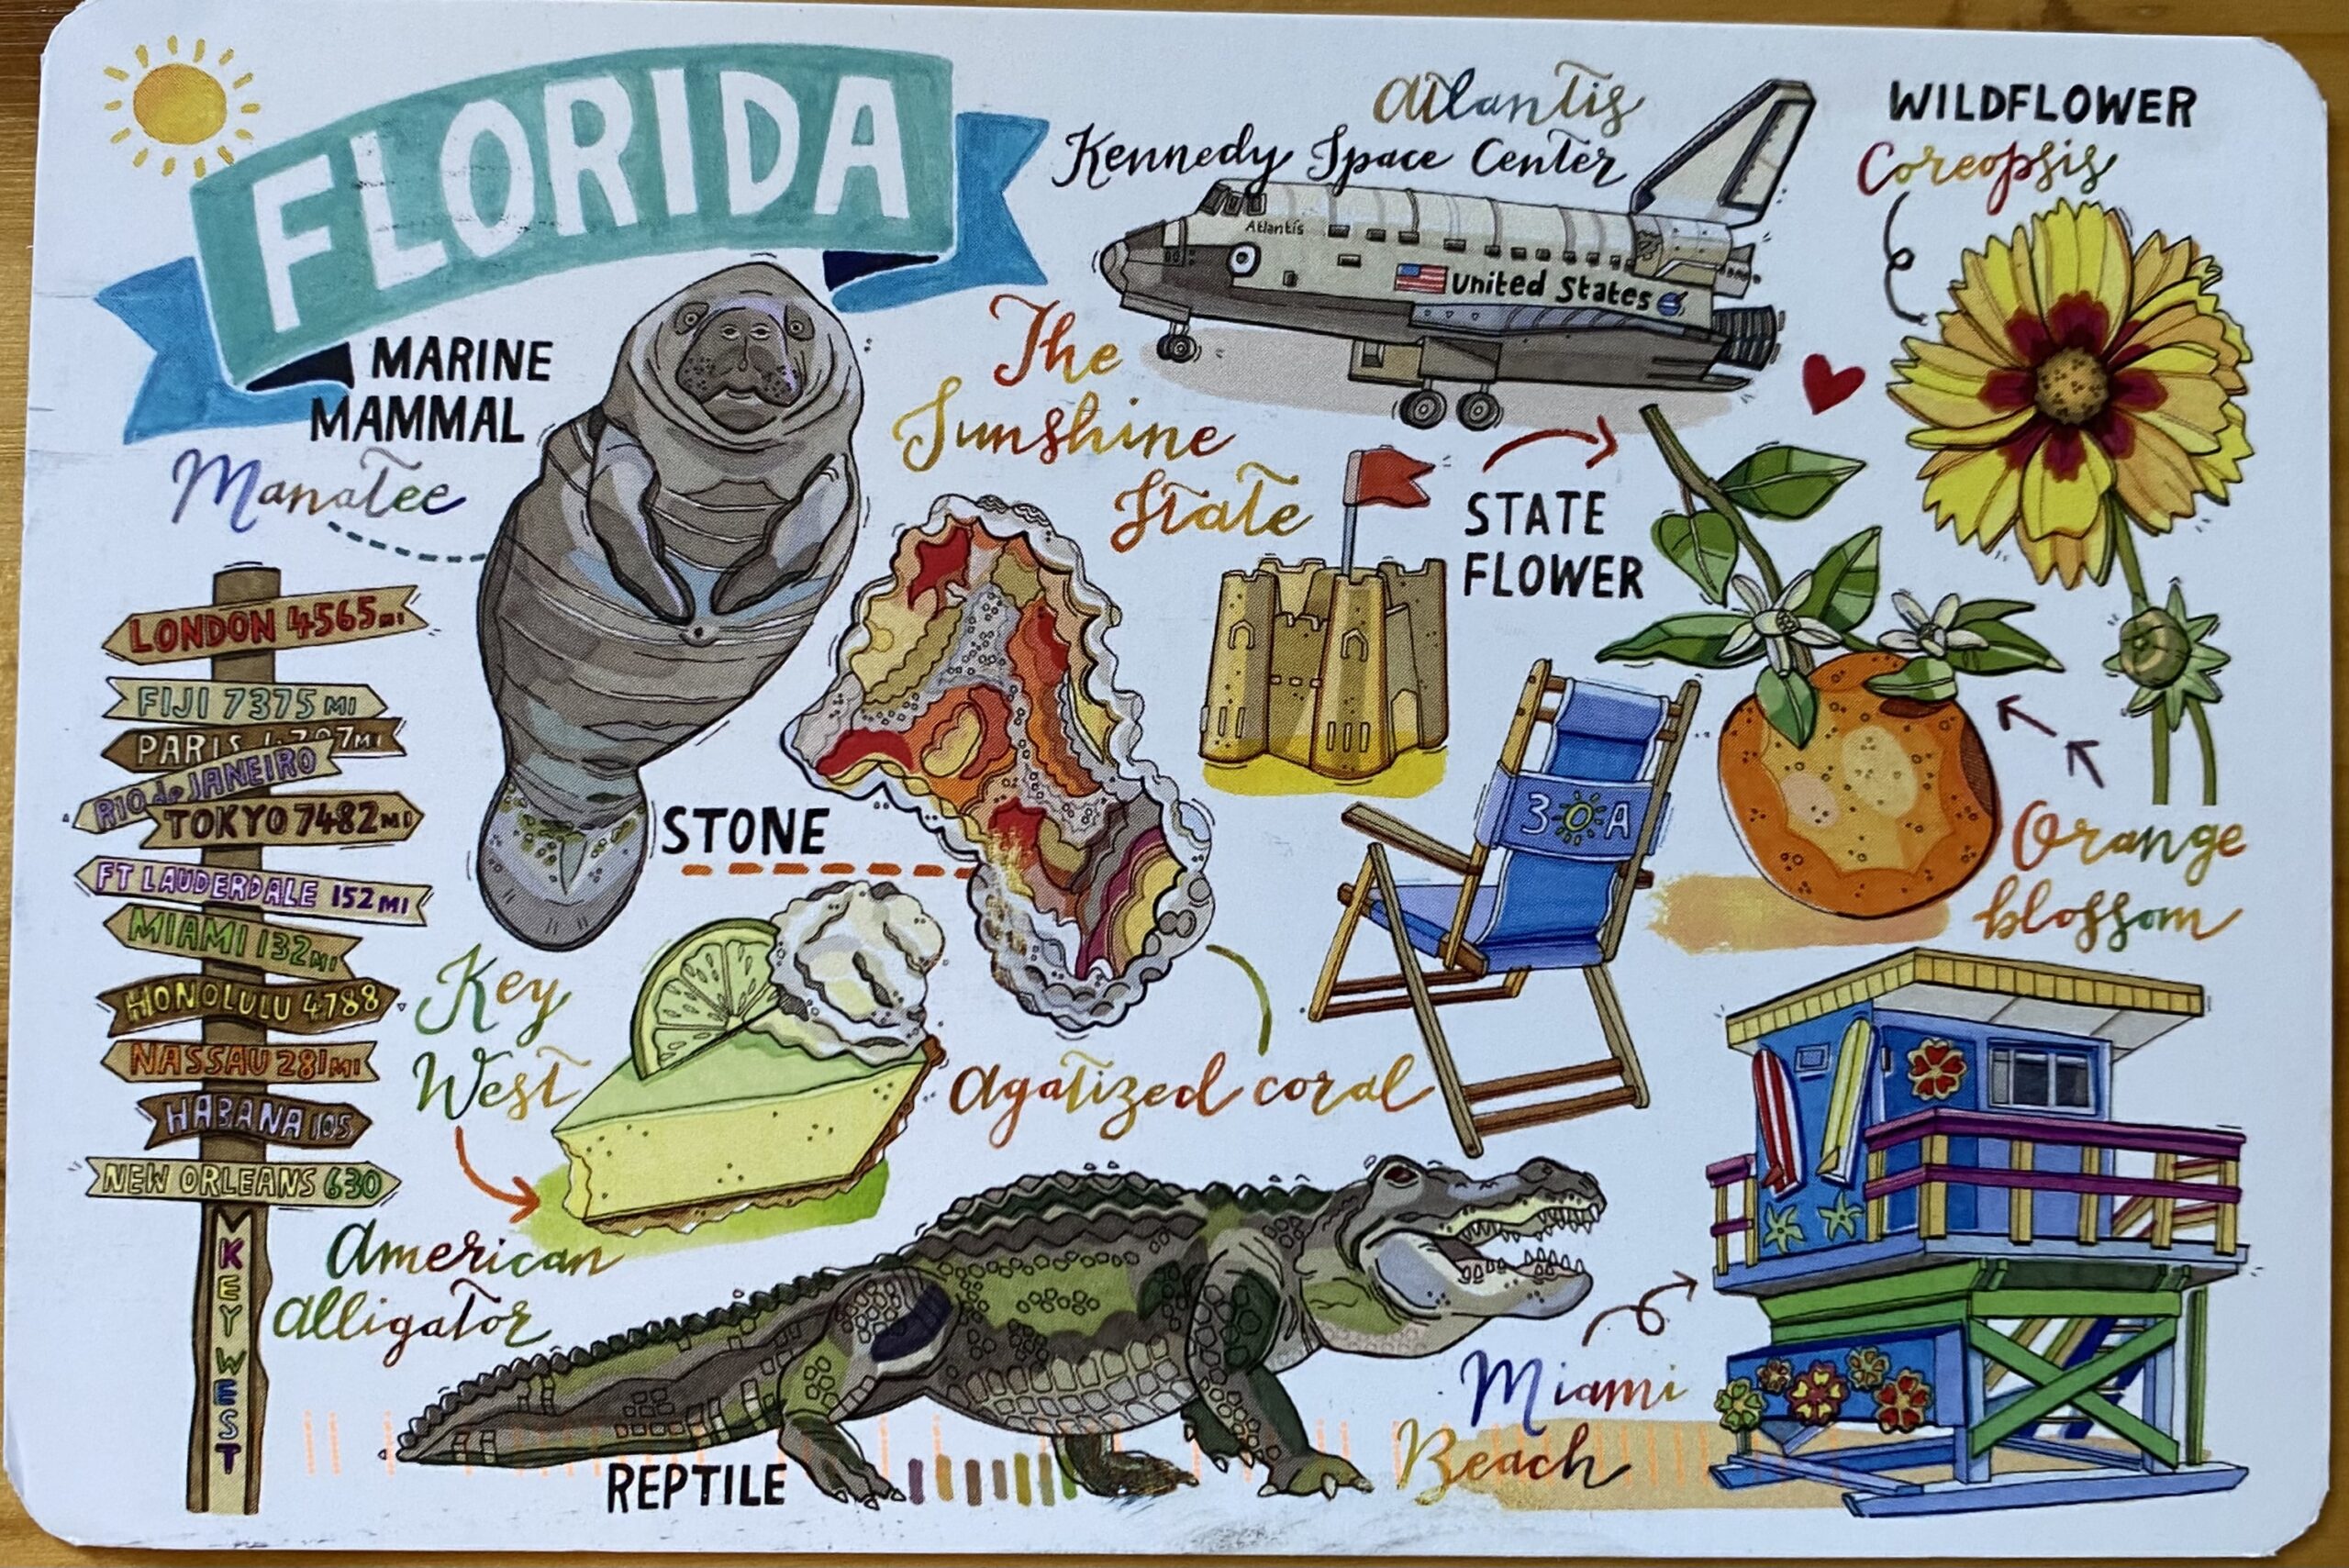 Postcard from Florida, received August 10 2022